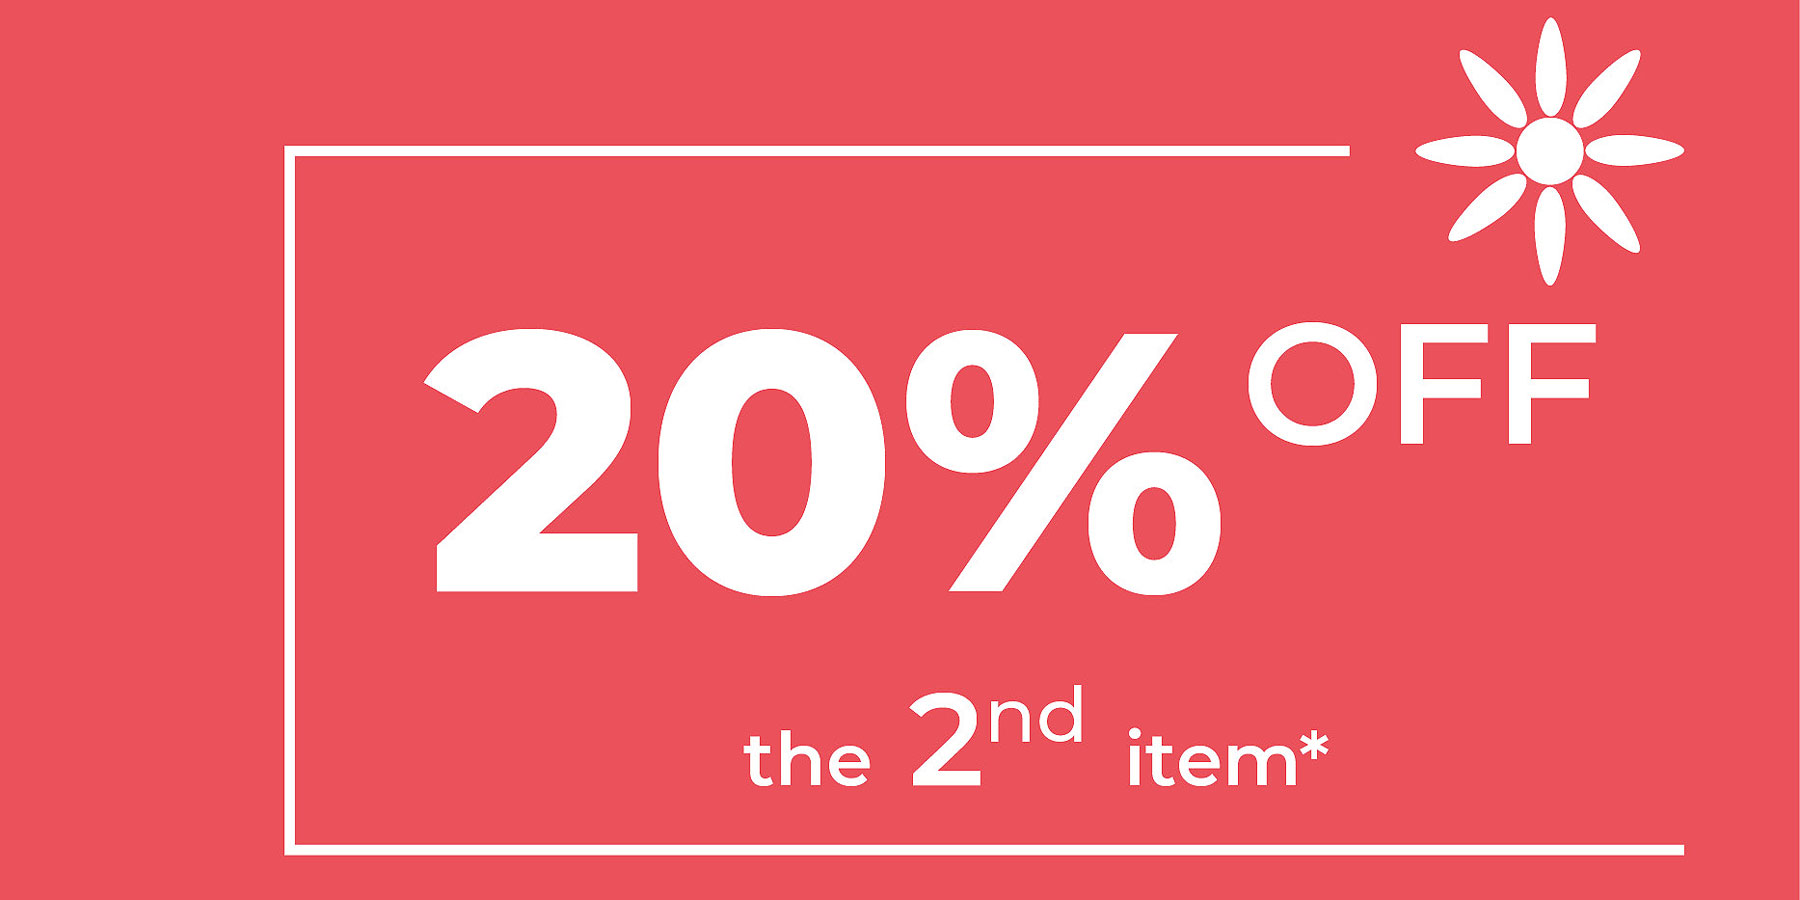 Enjoy 20% off the second item for women, men and kids 